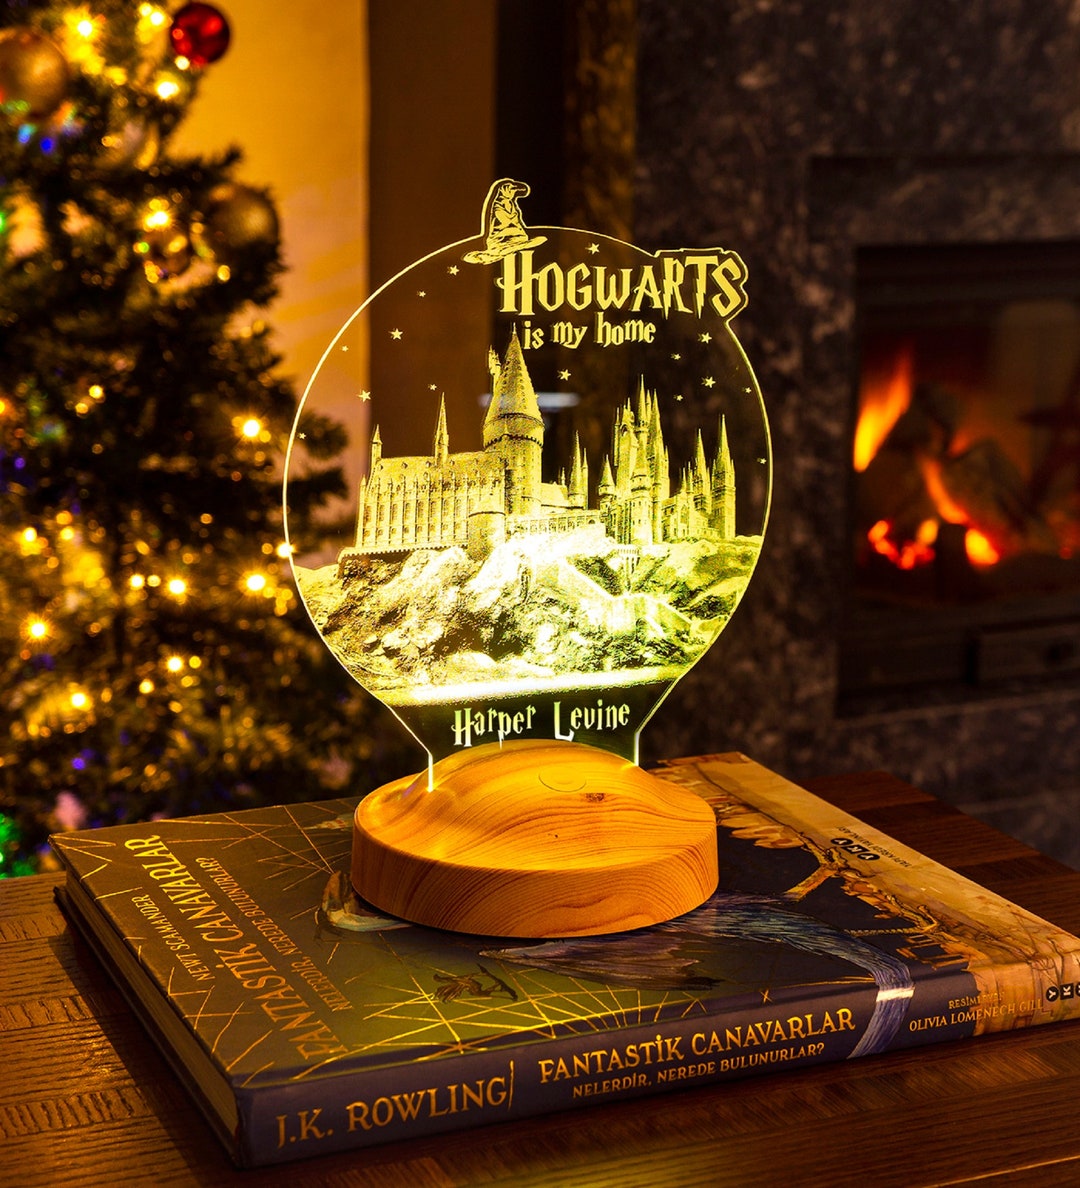 19 Essential Harry Potter Decorative Accessories for an Elevated